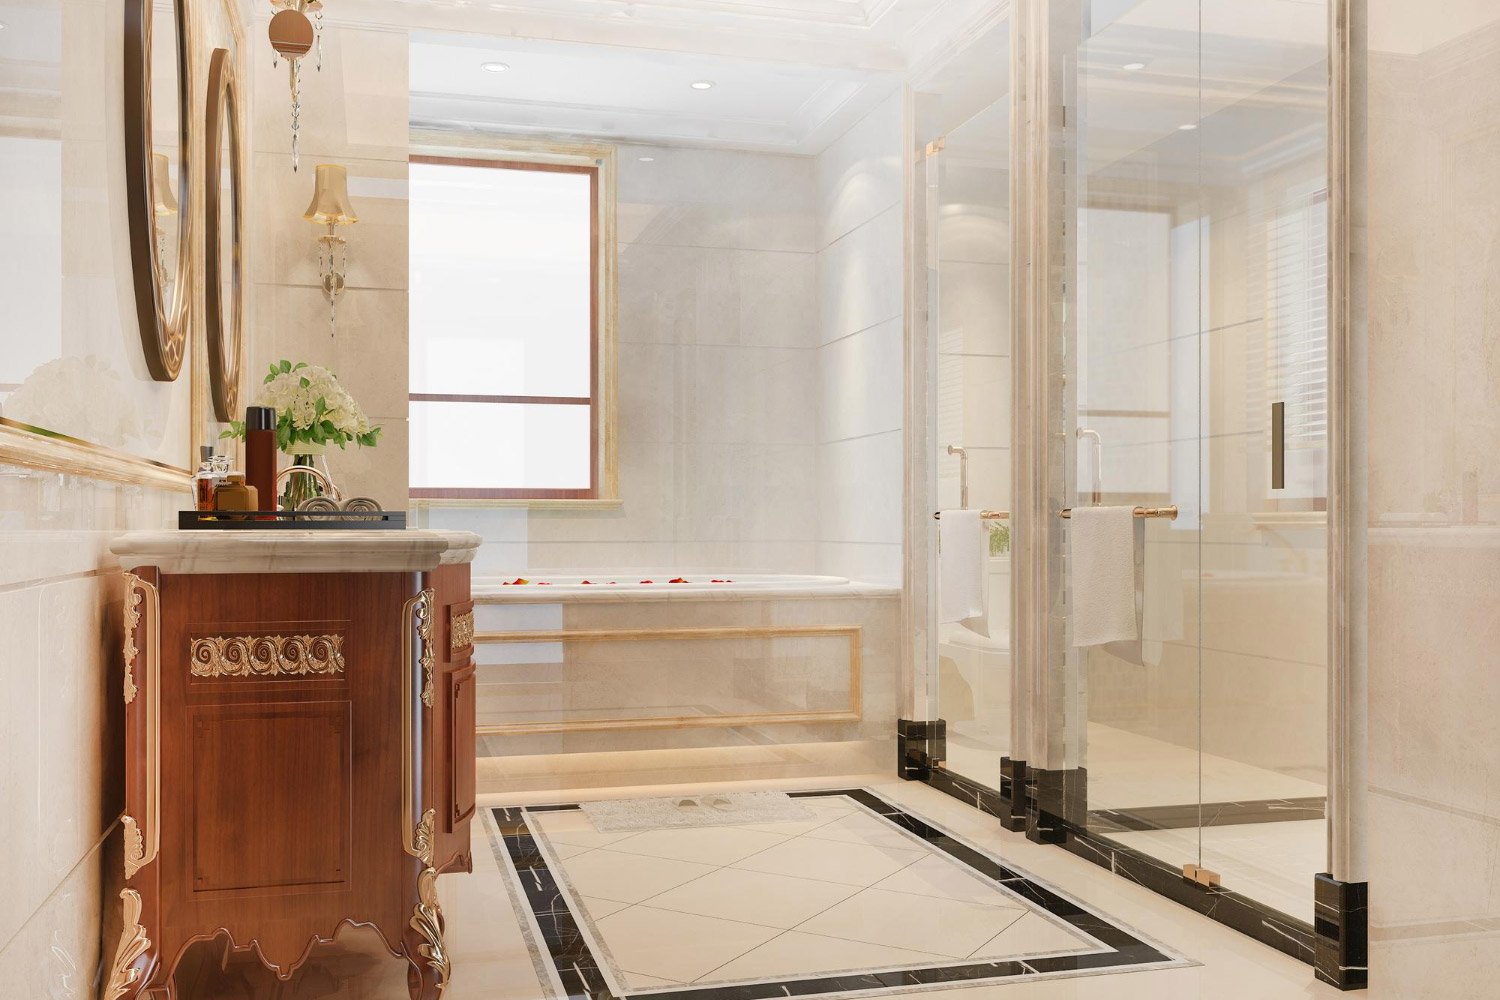 A bathroom with a marble floor and a glass shower.